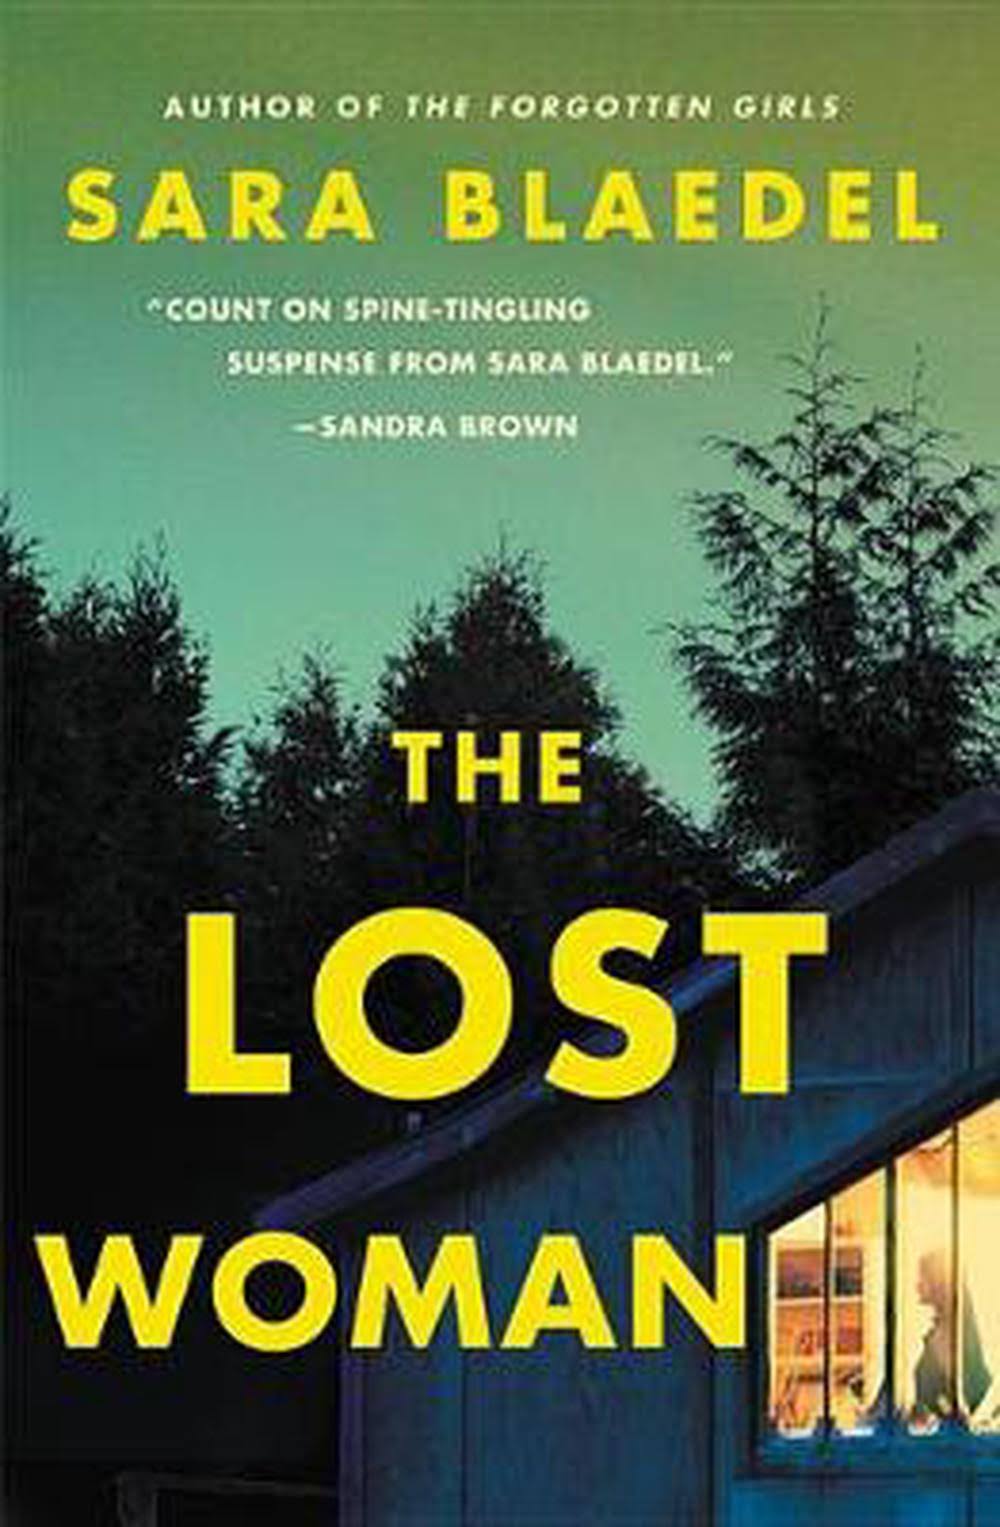 The Lost Woman [Book]